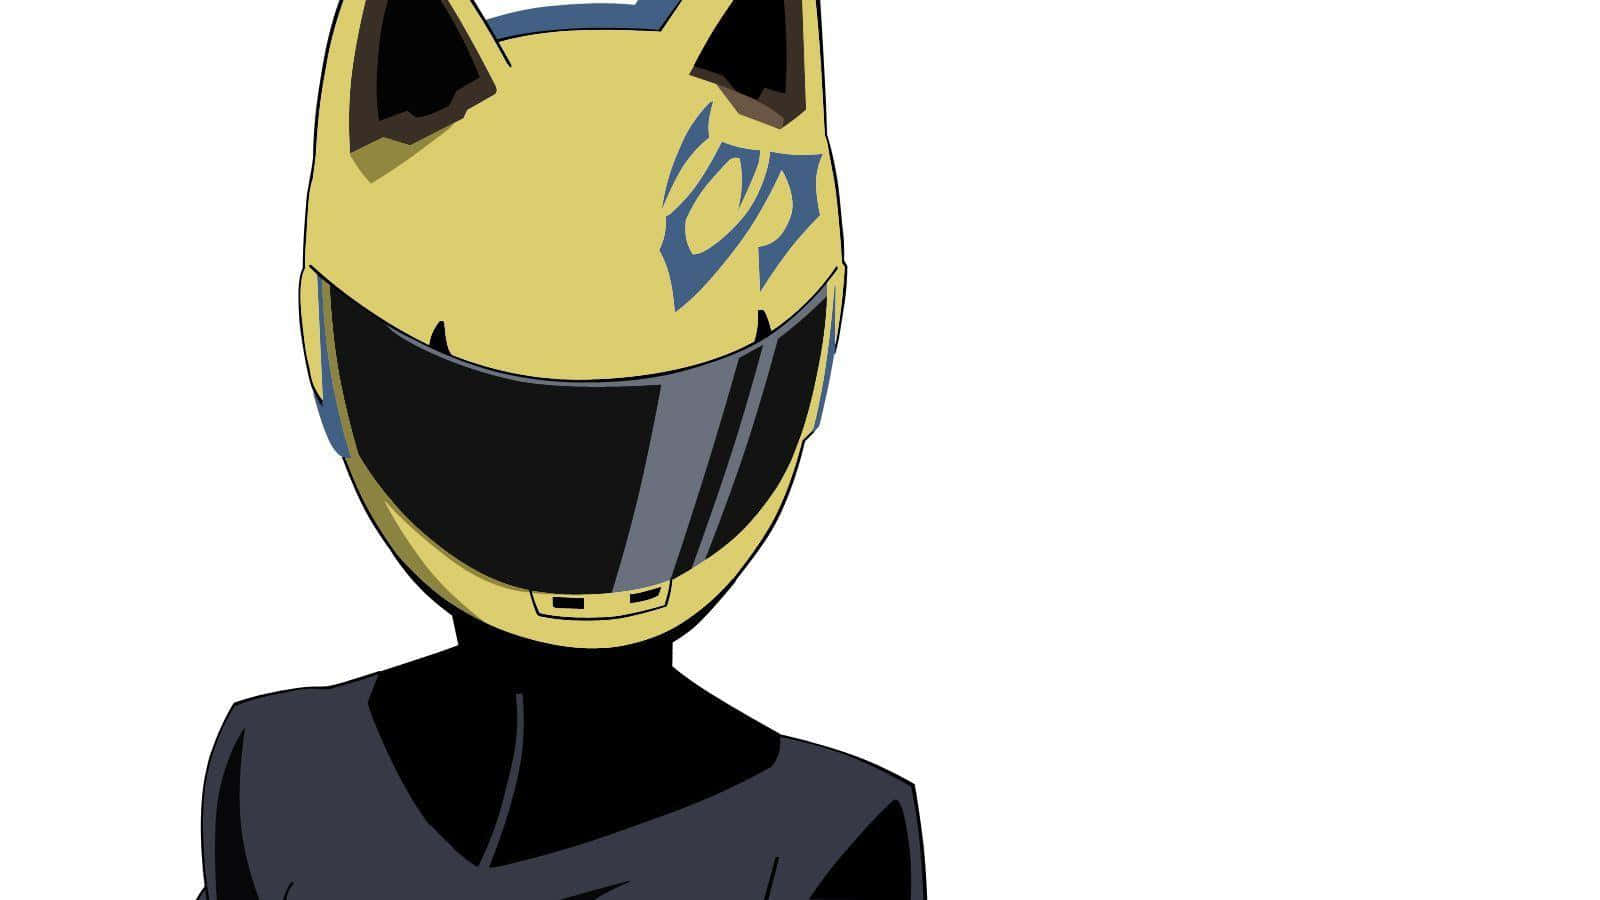 Celty Sturluson riding through the city on her motorcycle Wallpaper